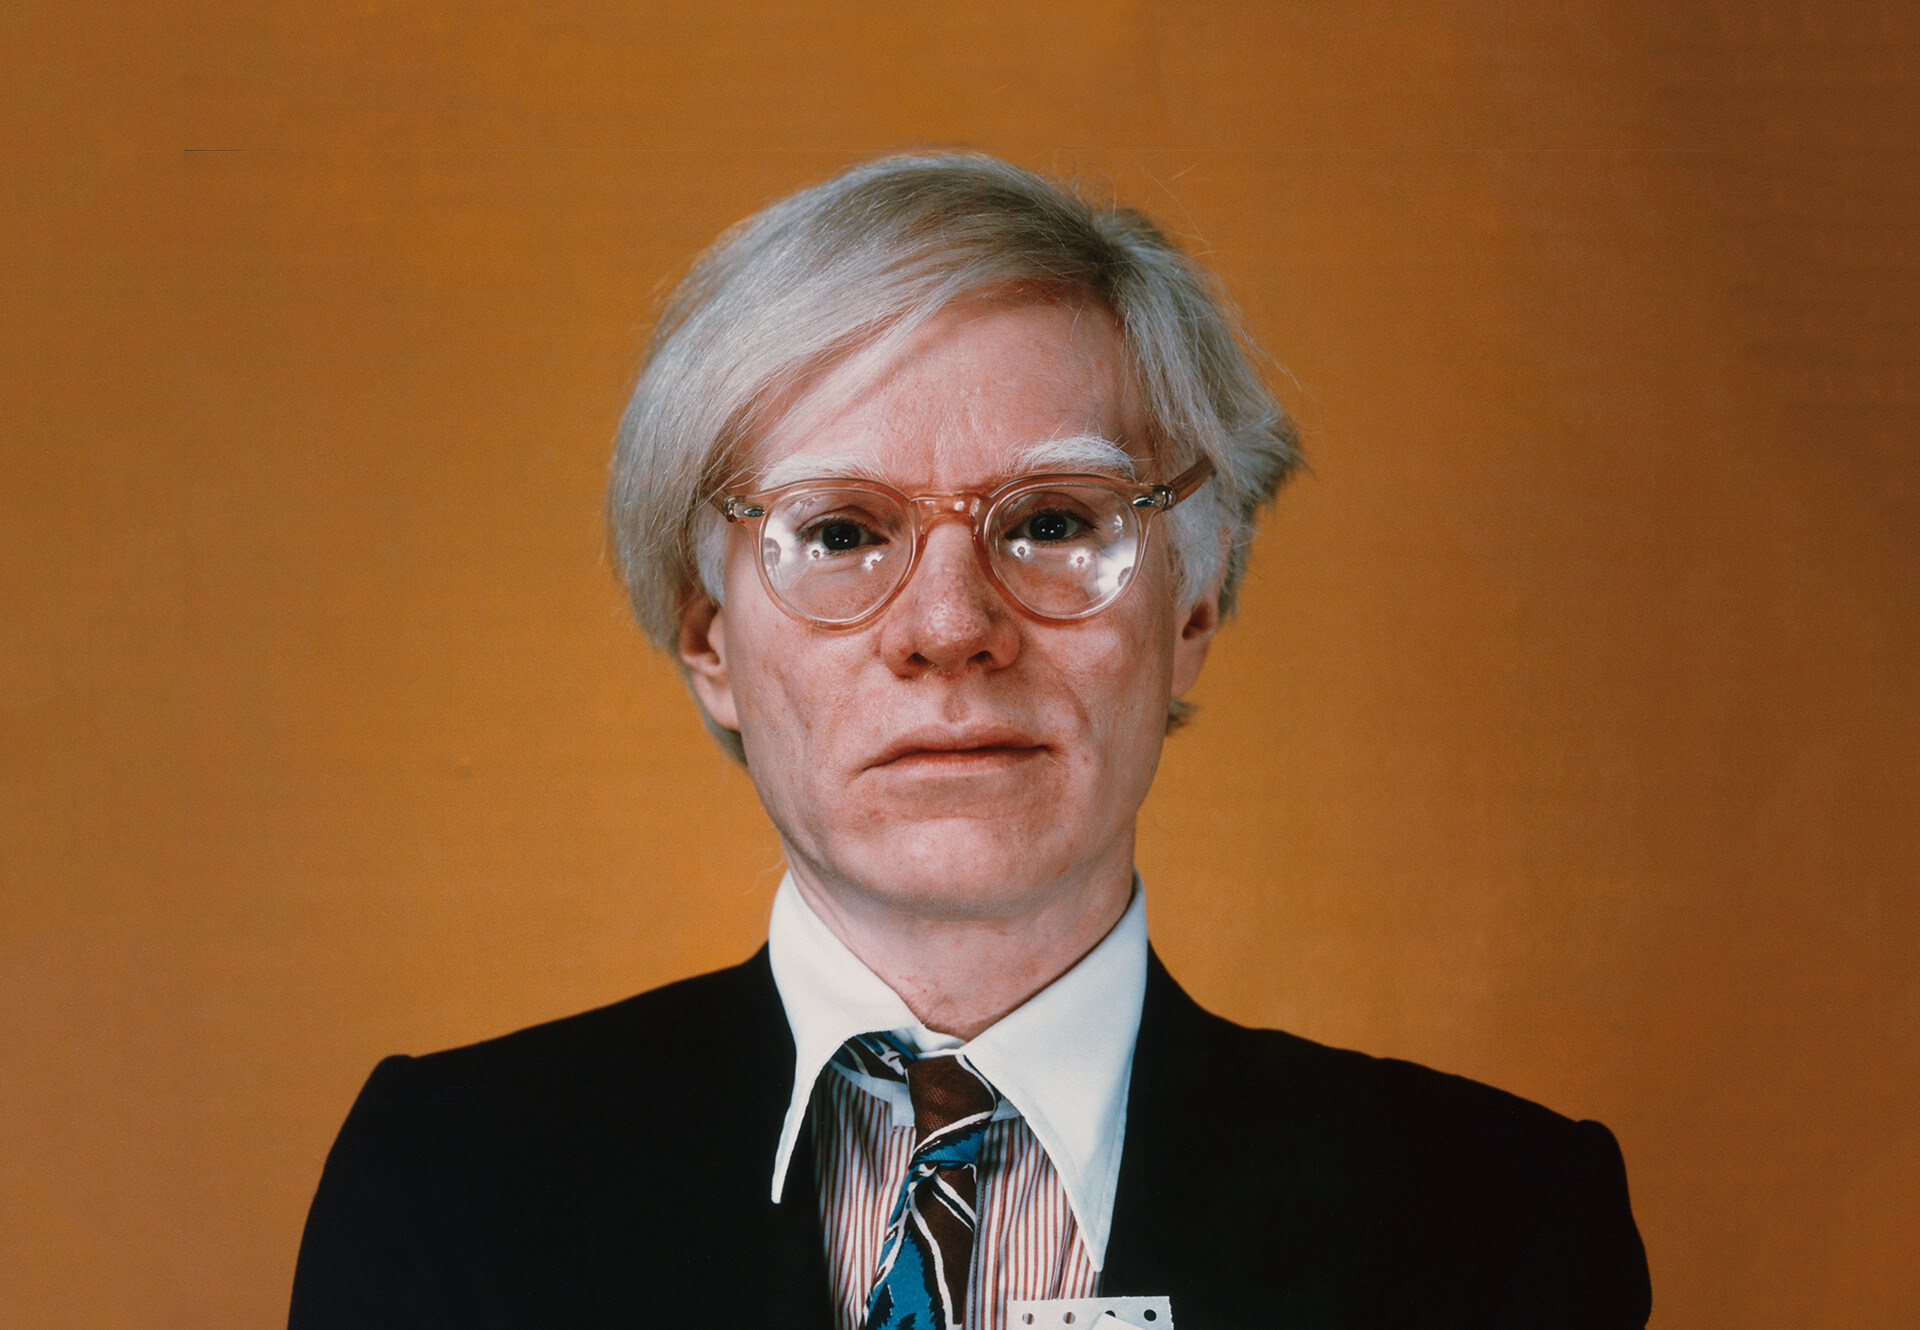 Famous People With Autism Spectrum Disorder - Andy Warhol - American Visual Artist